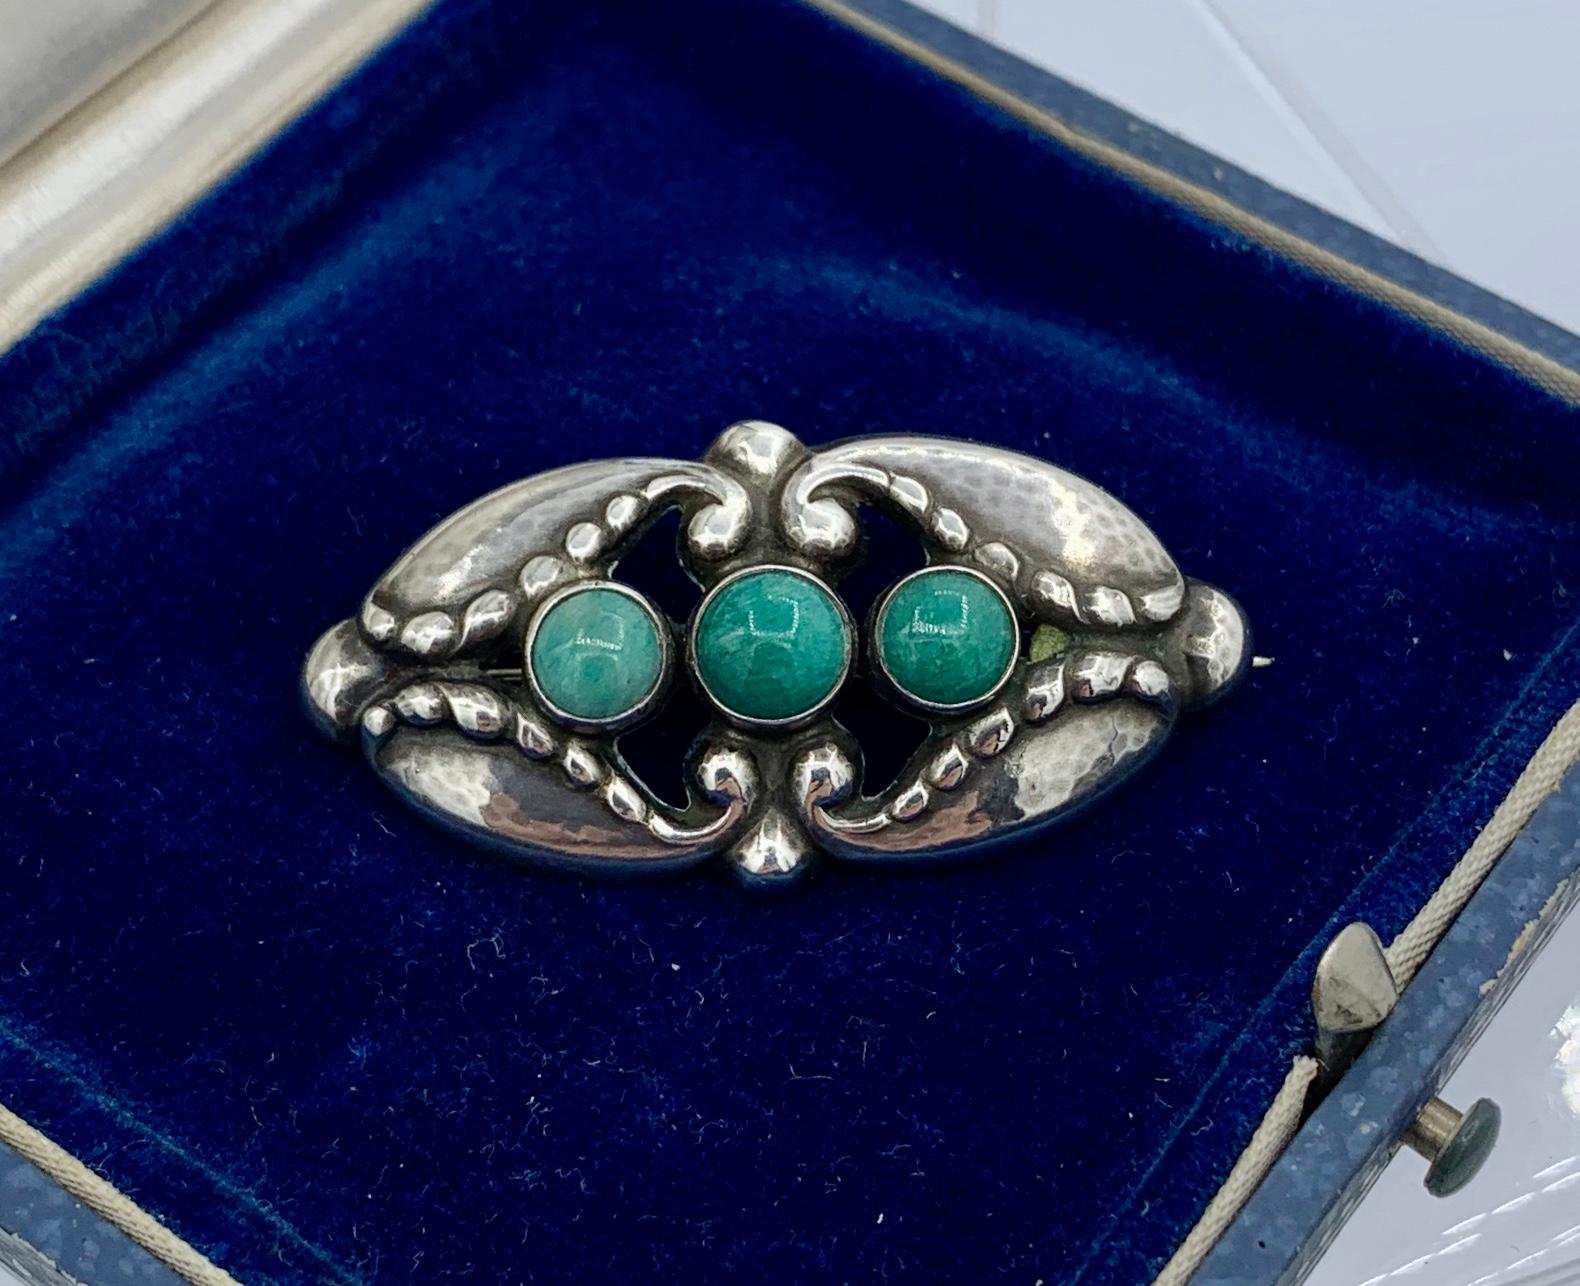 This is the rare Georg Jensen Brooch No. 156 with Green Agate.  This classic Jensen sterling silver brooch with cabochon green agates was designed by personally by Georg Jensen. Finding Jensen pieces with stones is always a delight and this iconic